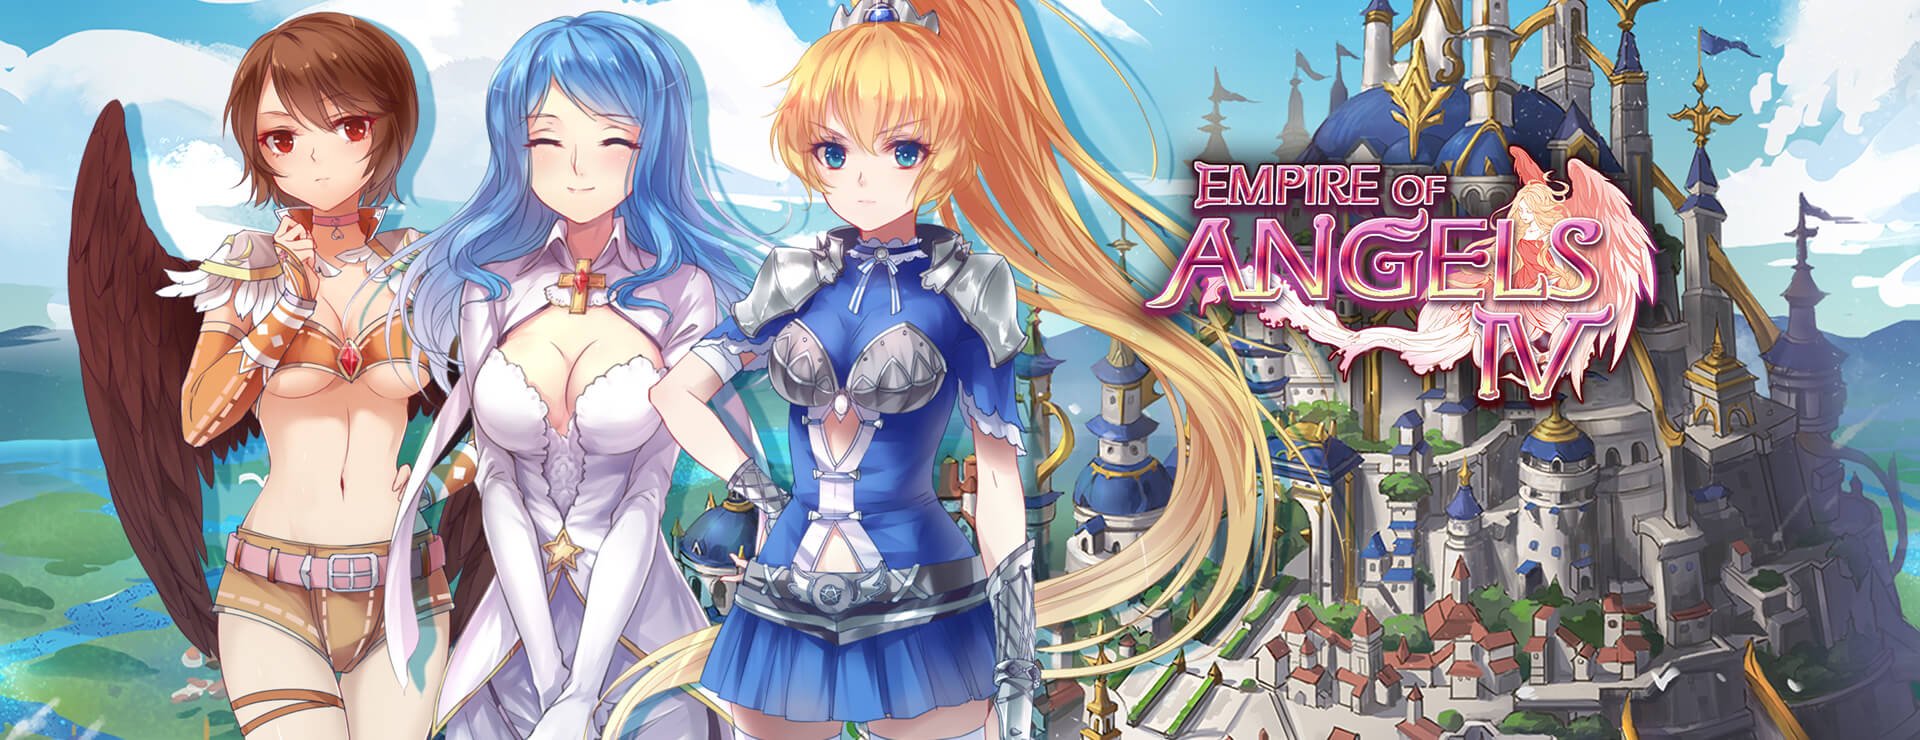 Empire of Angels IV - Action Adventure Game